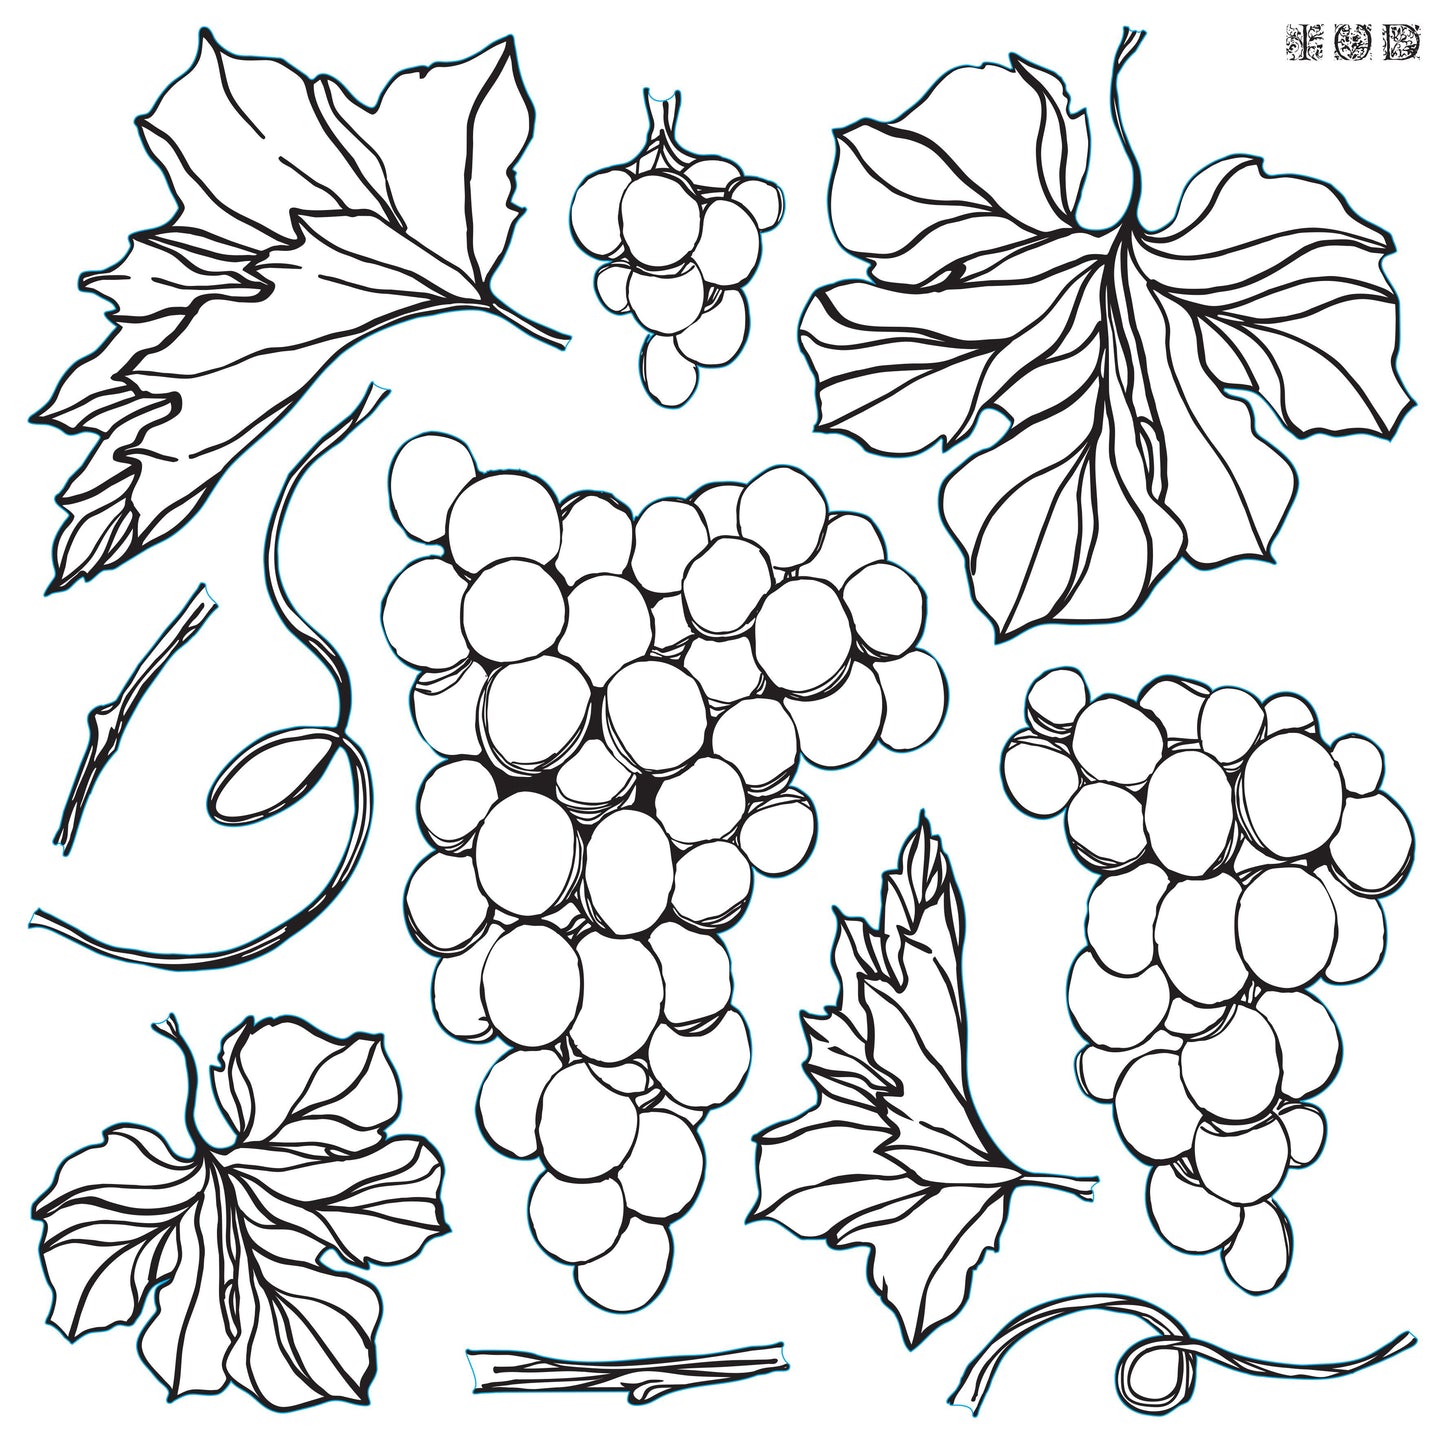 IOD Grapes Stamp by Iron Orchid Designs